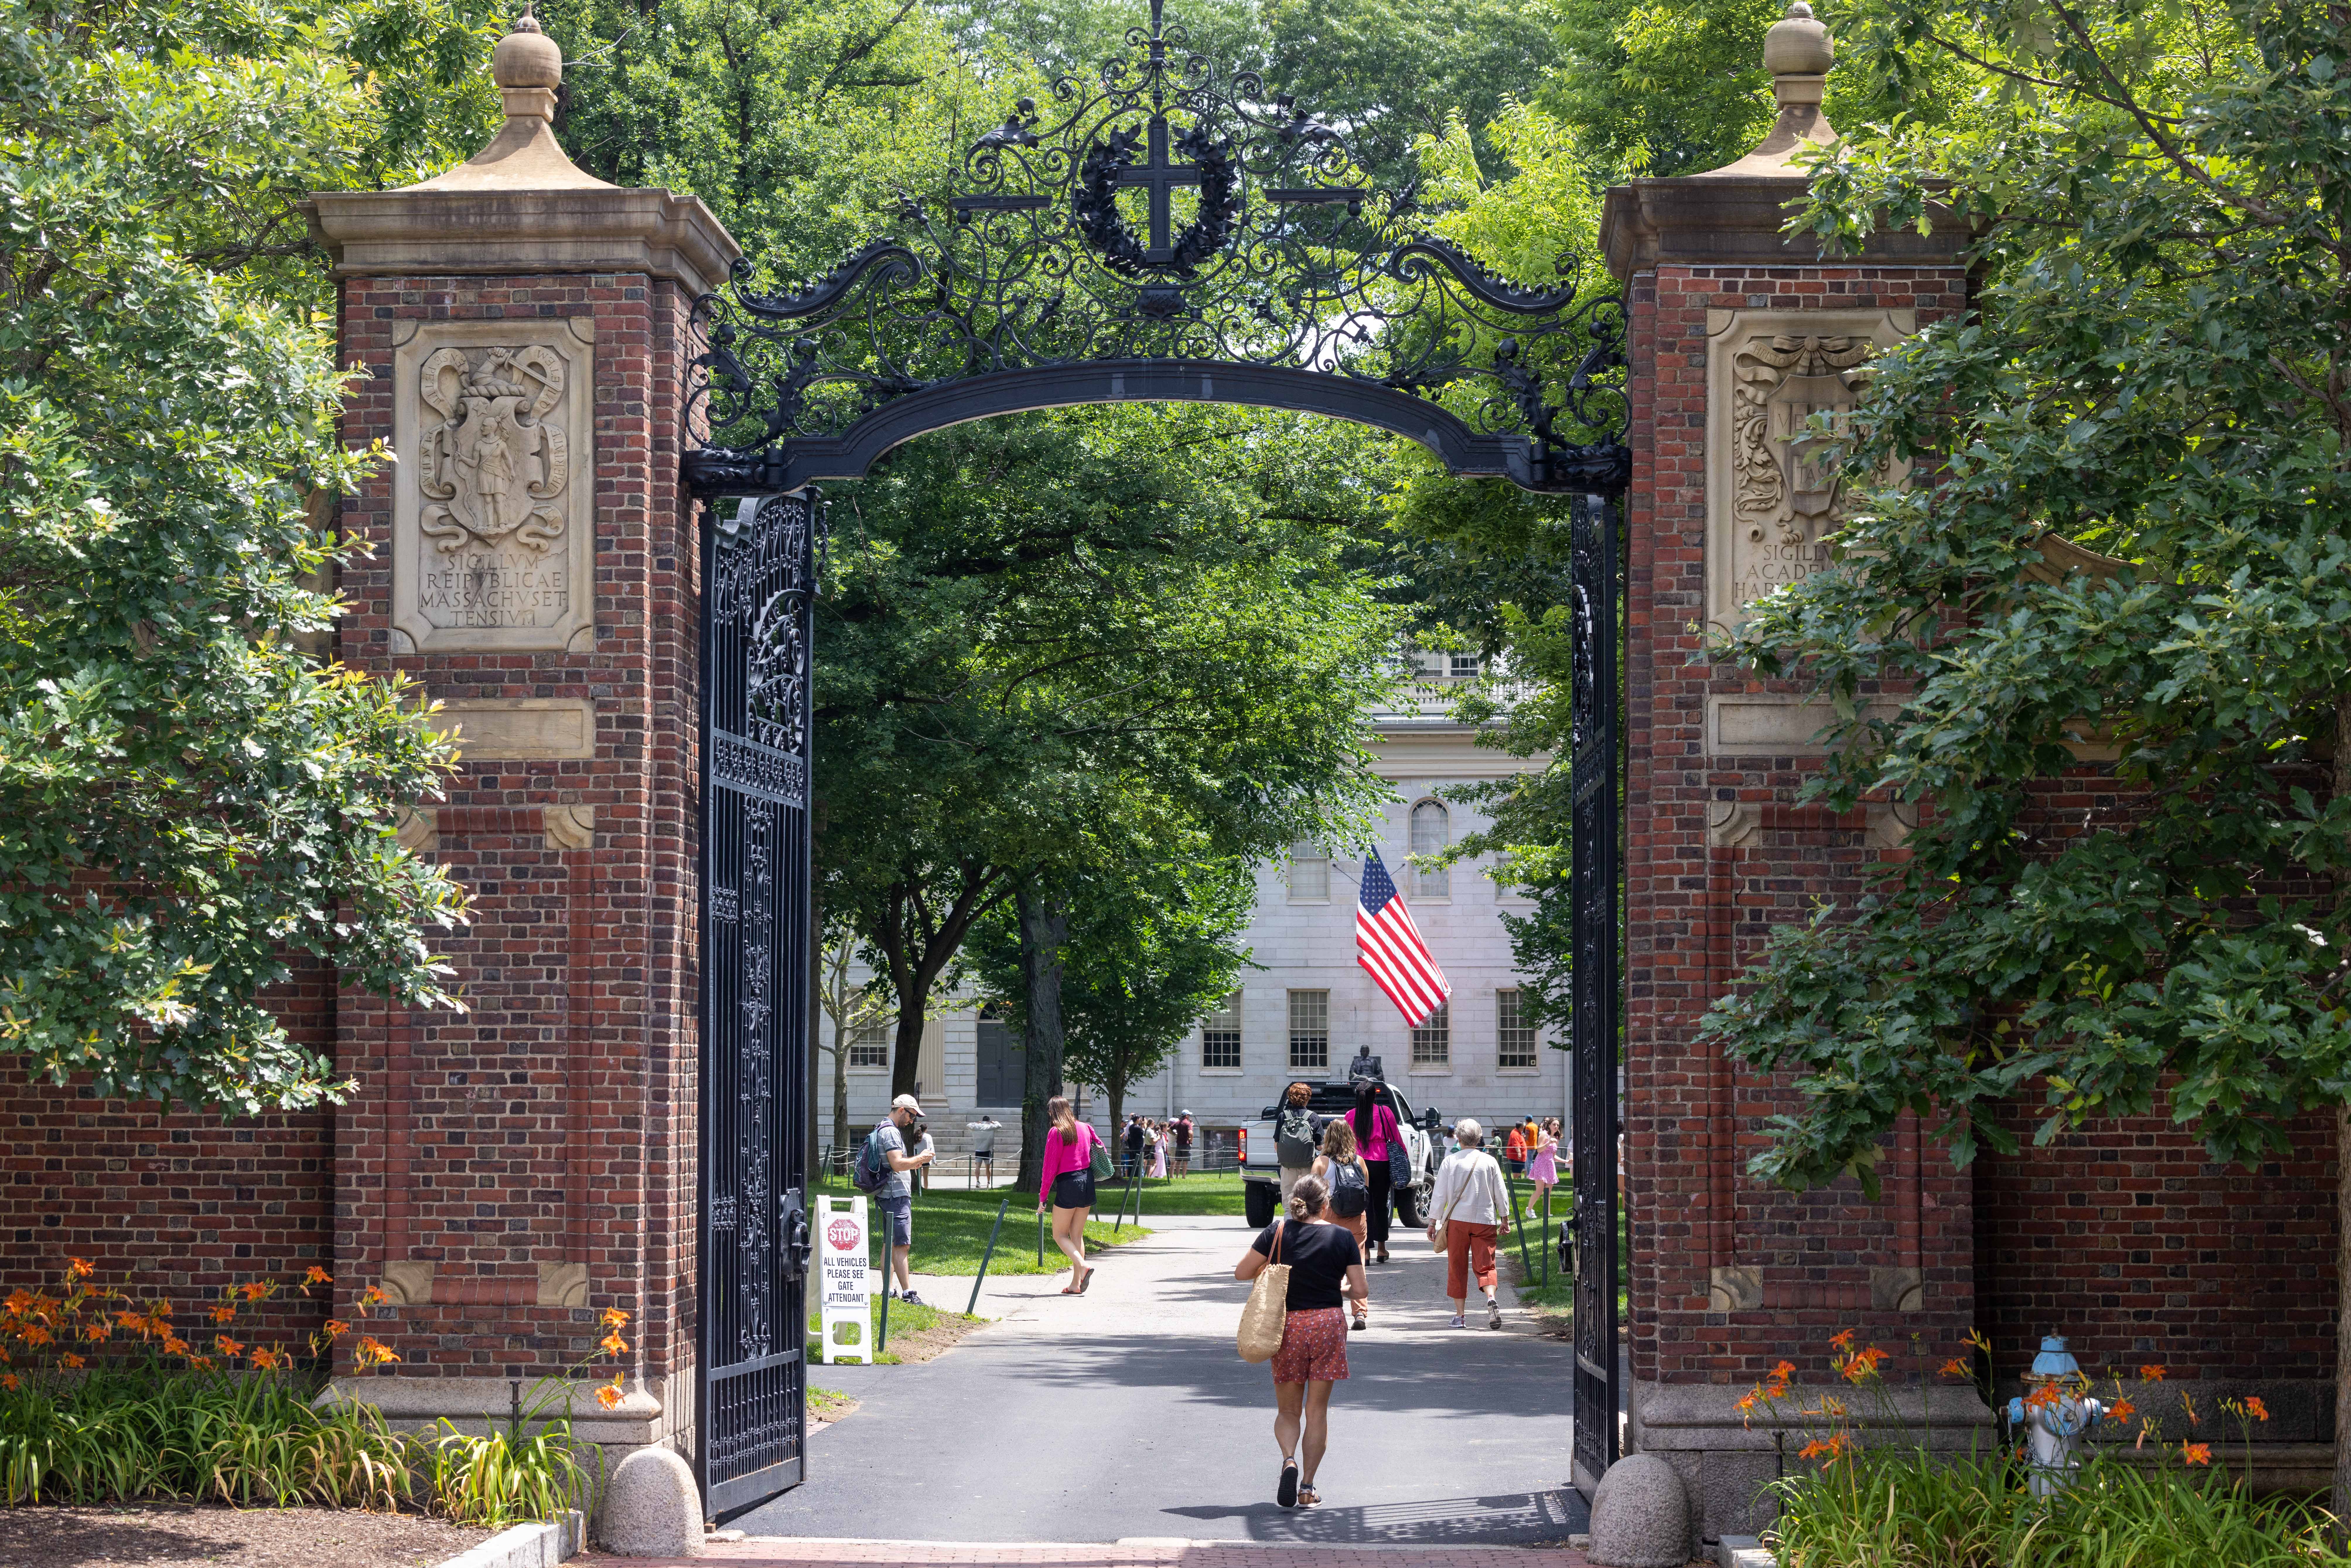 People walk through the gate on Harvard Yard at the Harvard University campus on June 29, 2023 in Cambridge, Massachusetts. The U.S. Supreme Court ruled that race-conscious admission policies used by Harvard and the University of North Carolina violate the Constitution, bringing an end to affirmative action in higher education. (Photo by Scott Eisen/Getty Images)